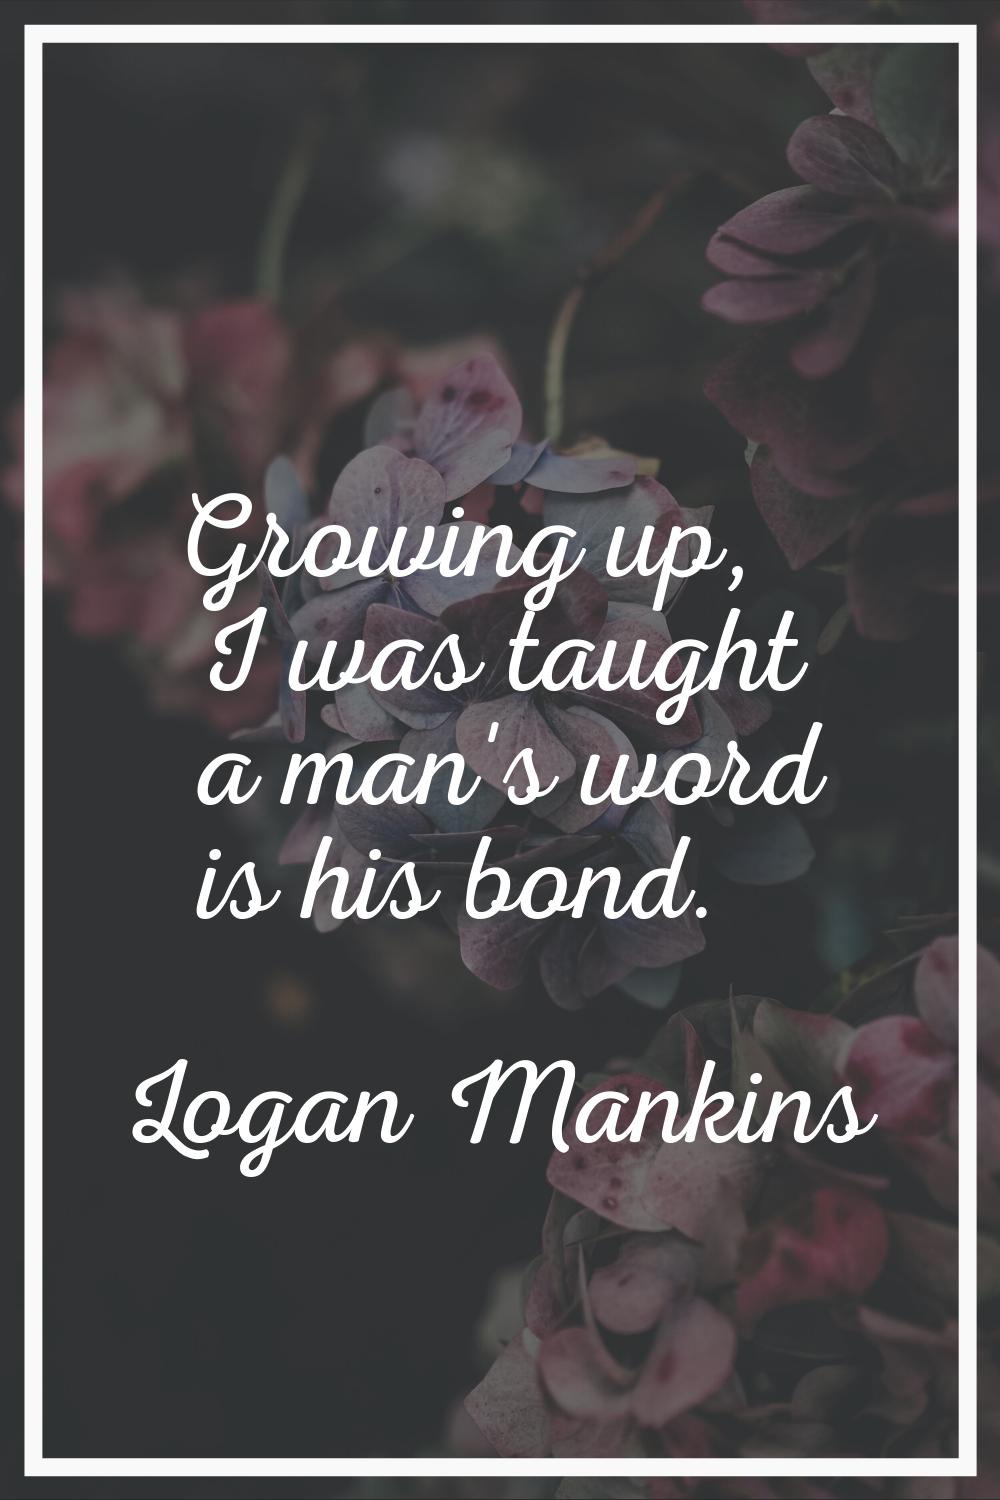 Growing up, I was taught a man's word is his bond.